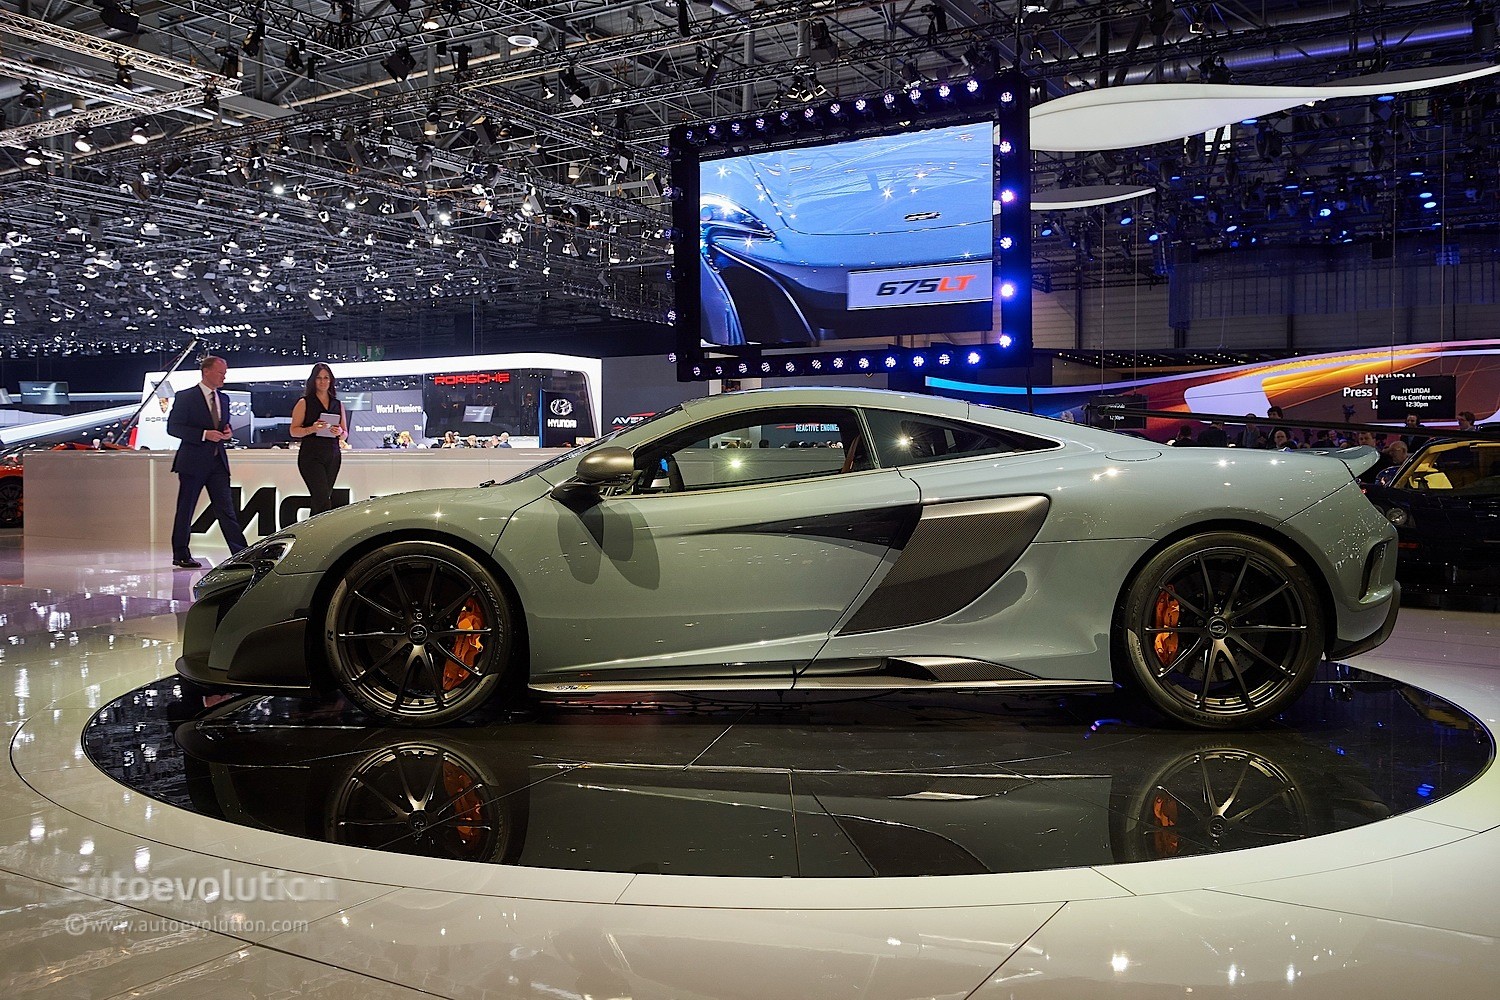 mclaren-675lt-is-just-as-impressive-as-the-f1-longtail-in-geneva-live-photos_6.jpg